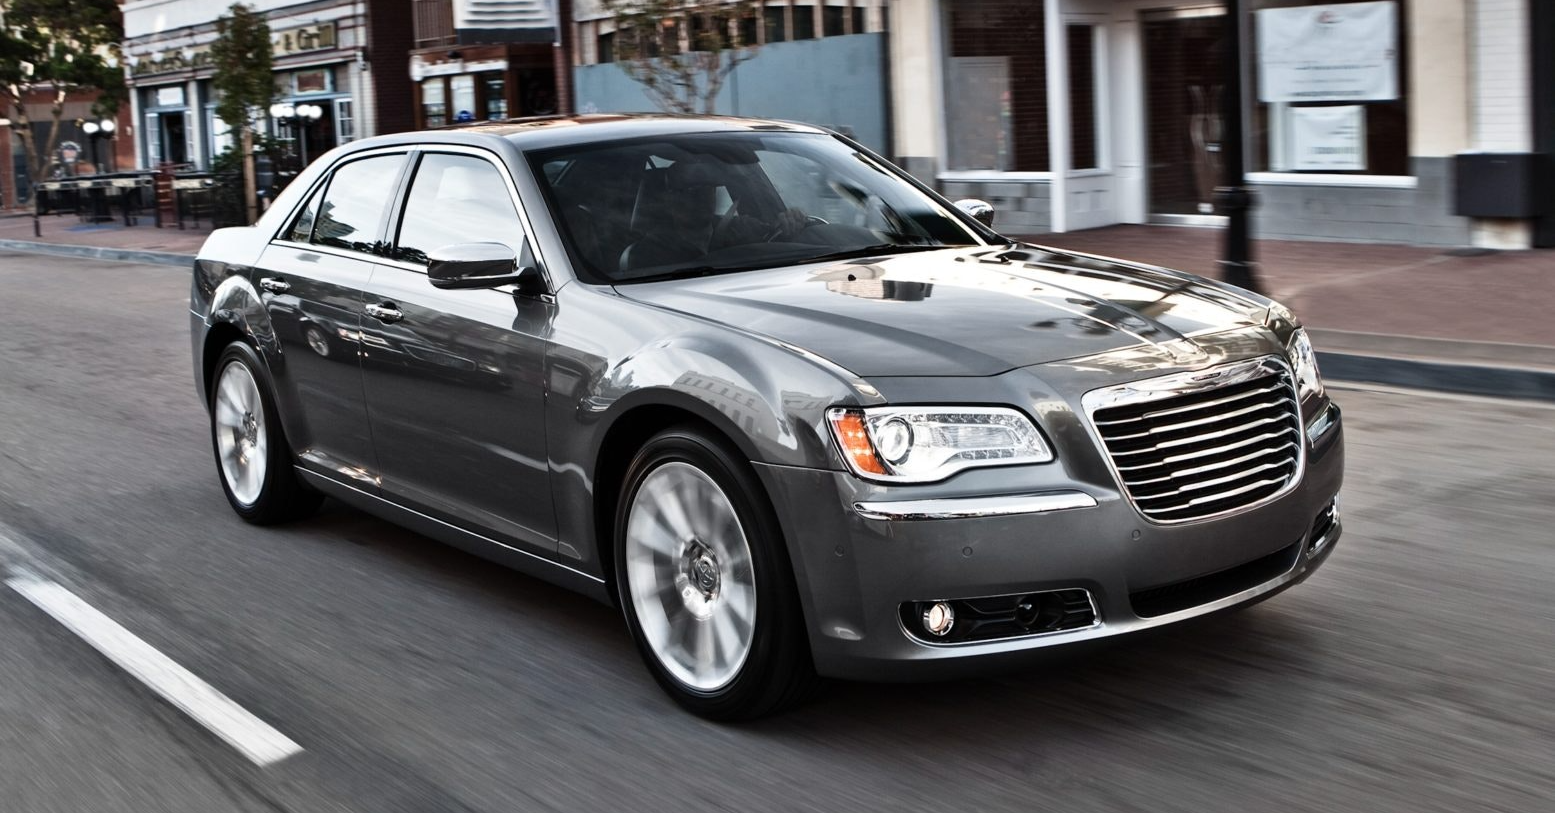 Was Chrysler Almost Whacked by Marchionne?